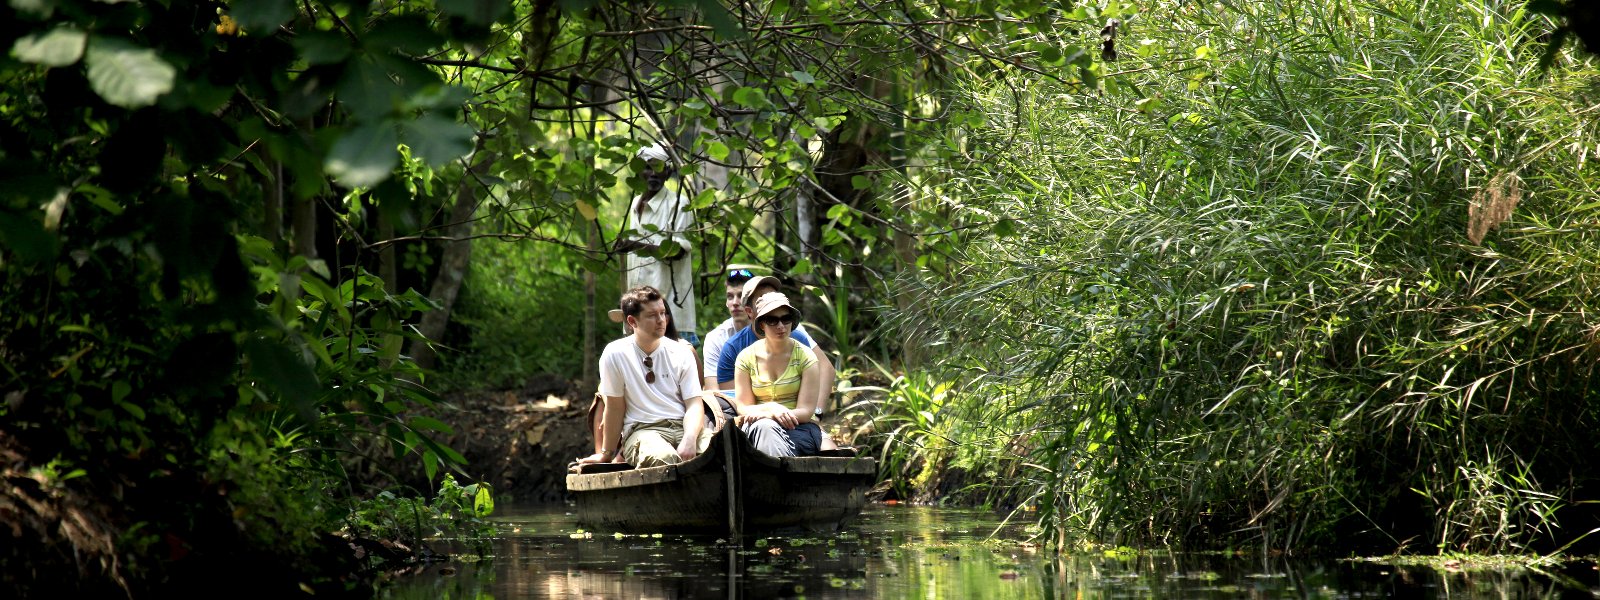 Picturesque country boat ride and village tour Kerala